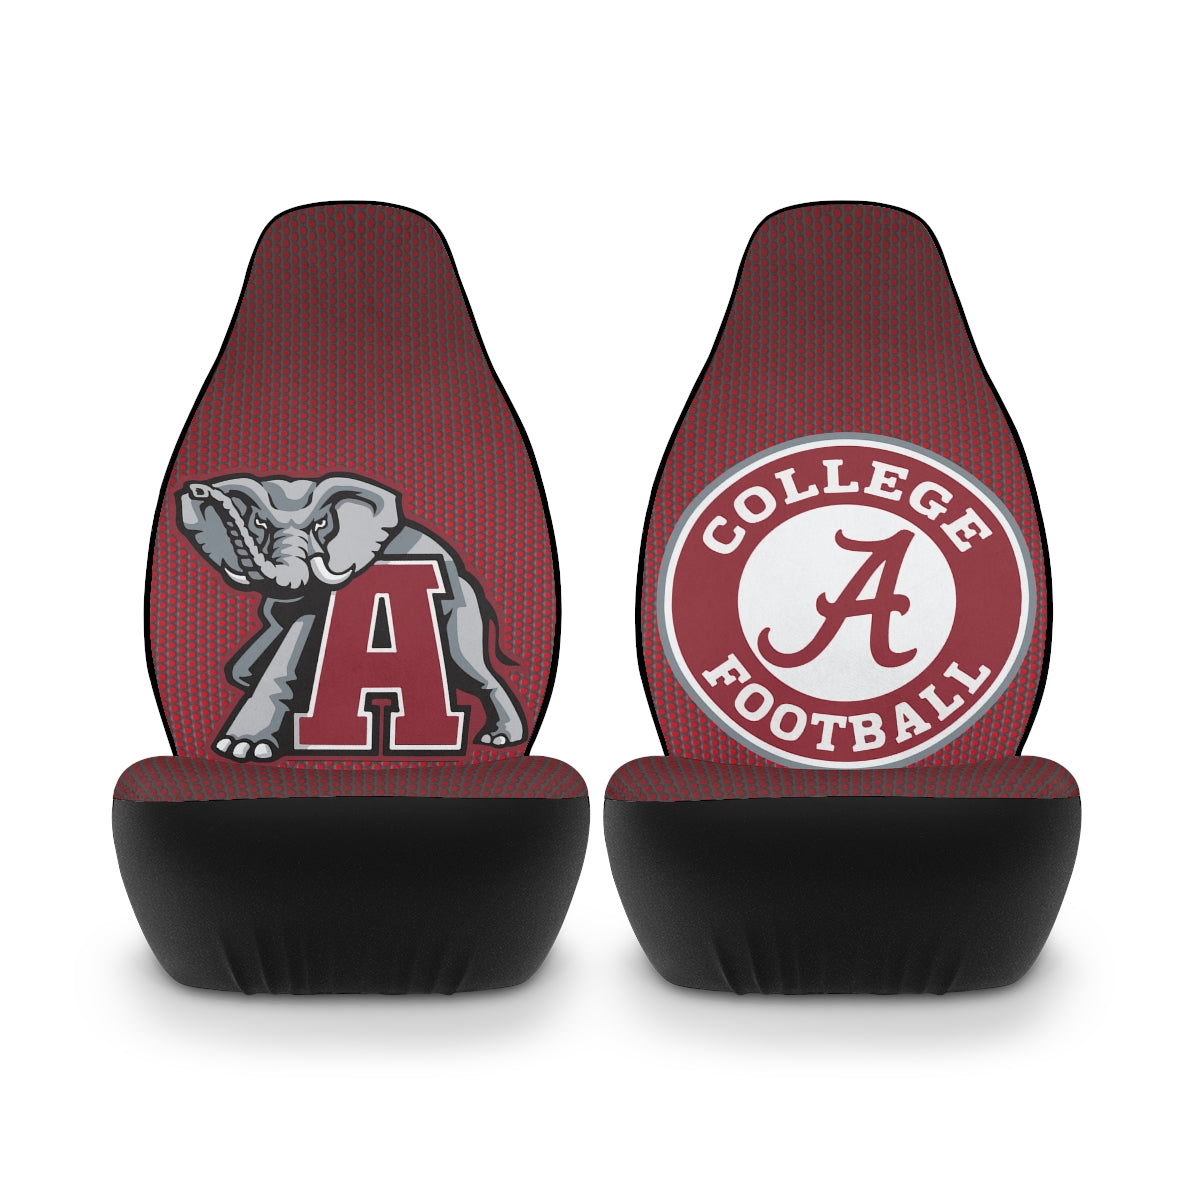 Alabama (3) Polyester Car Seat Covers